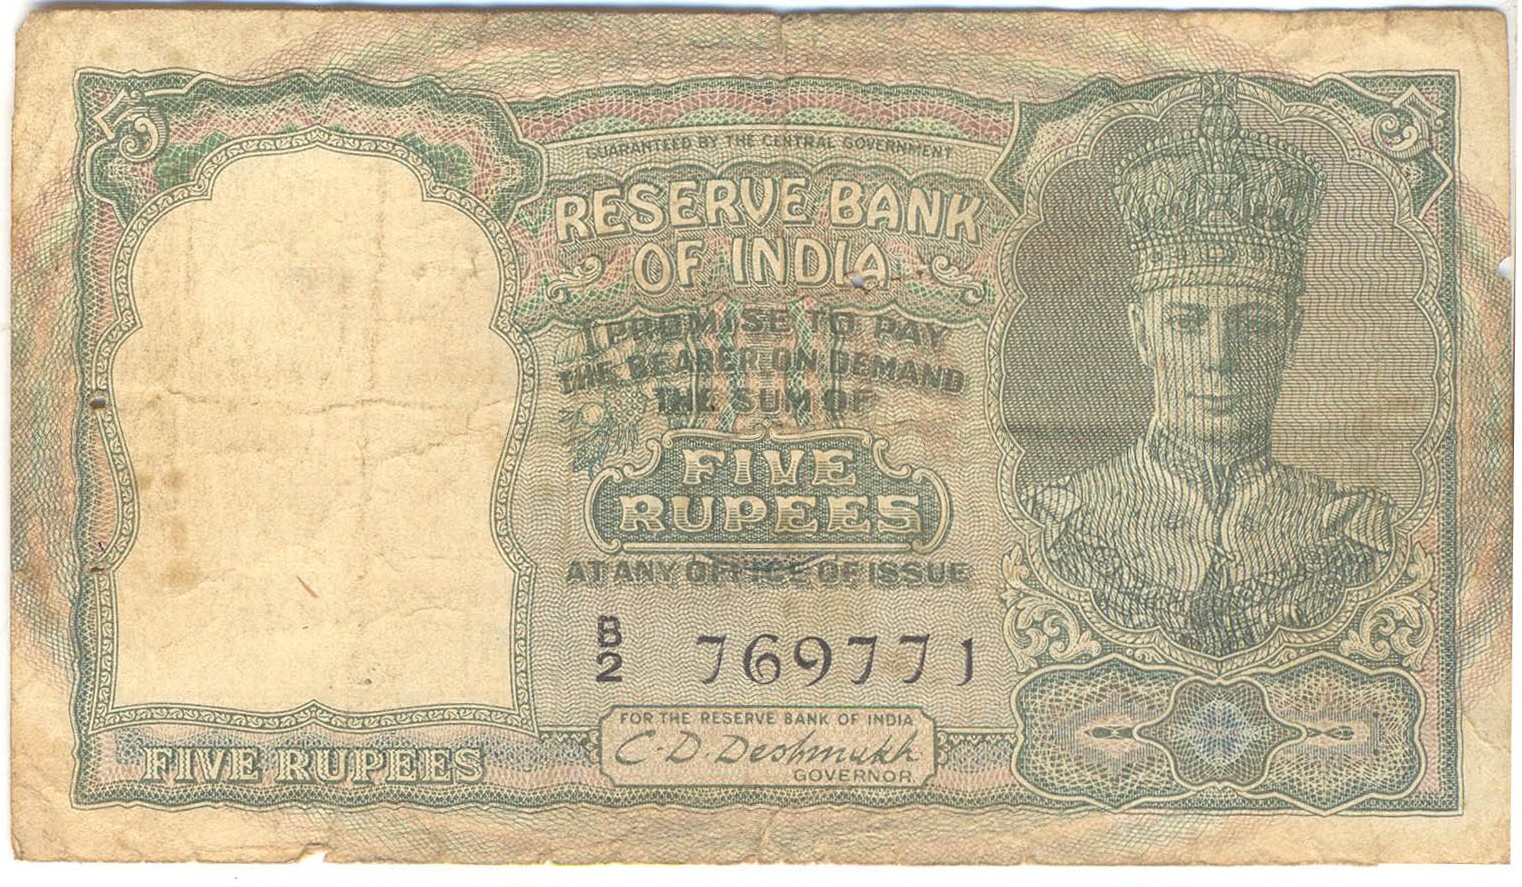 History Of Indian Currency Notes